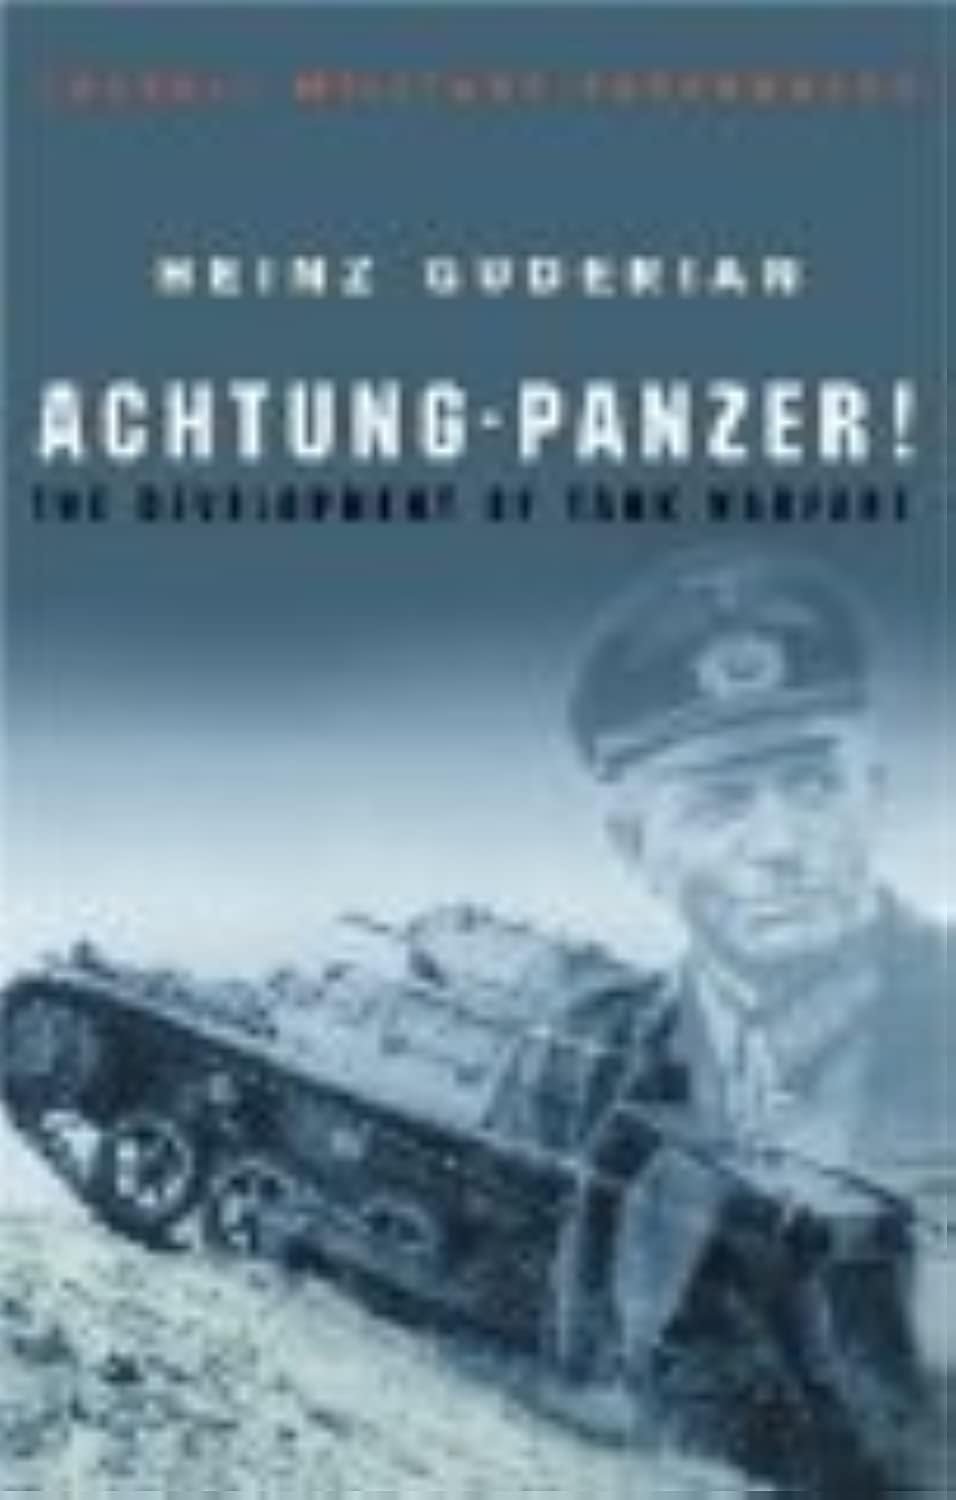 Achtung - Panzer! (Cassell Military Classics) - Insightful Military History